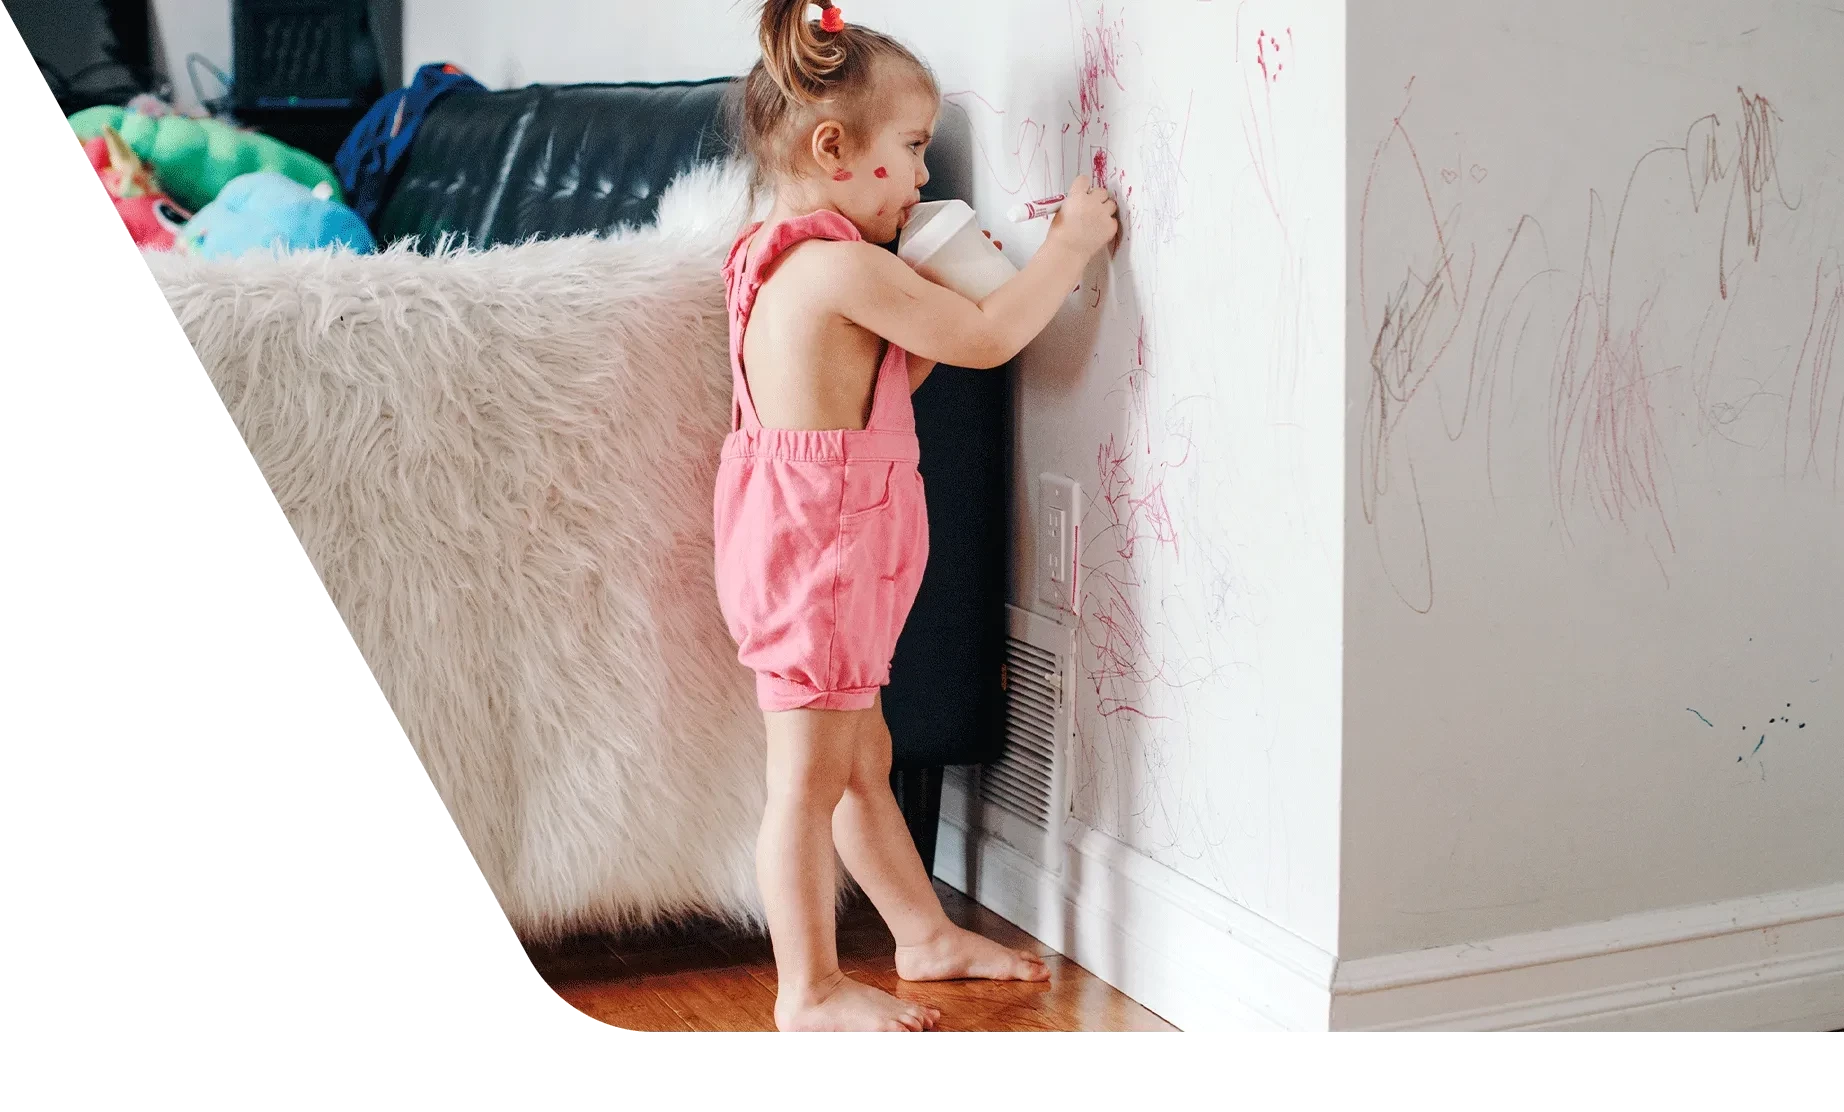 Toddler with sippy cup coloring on wall